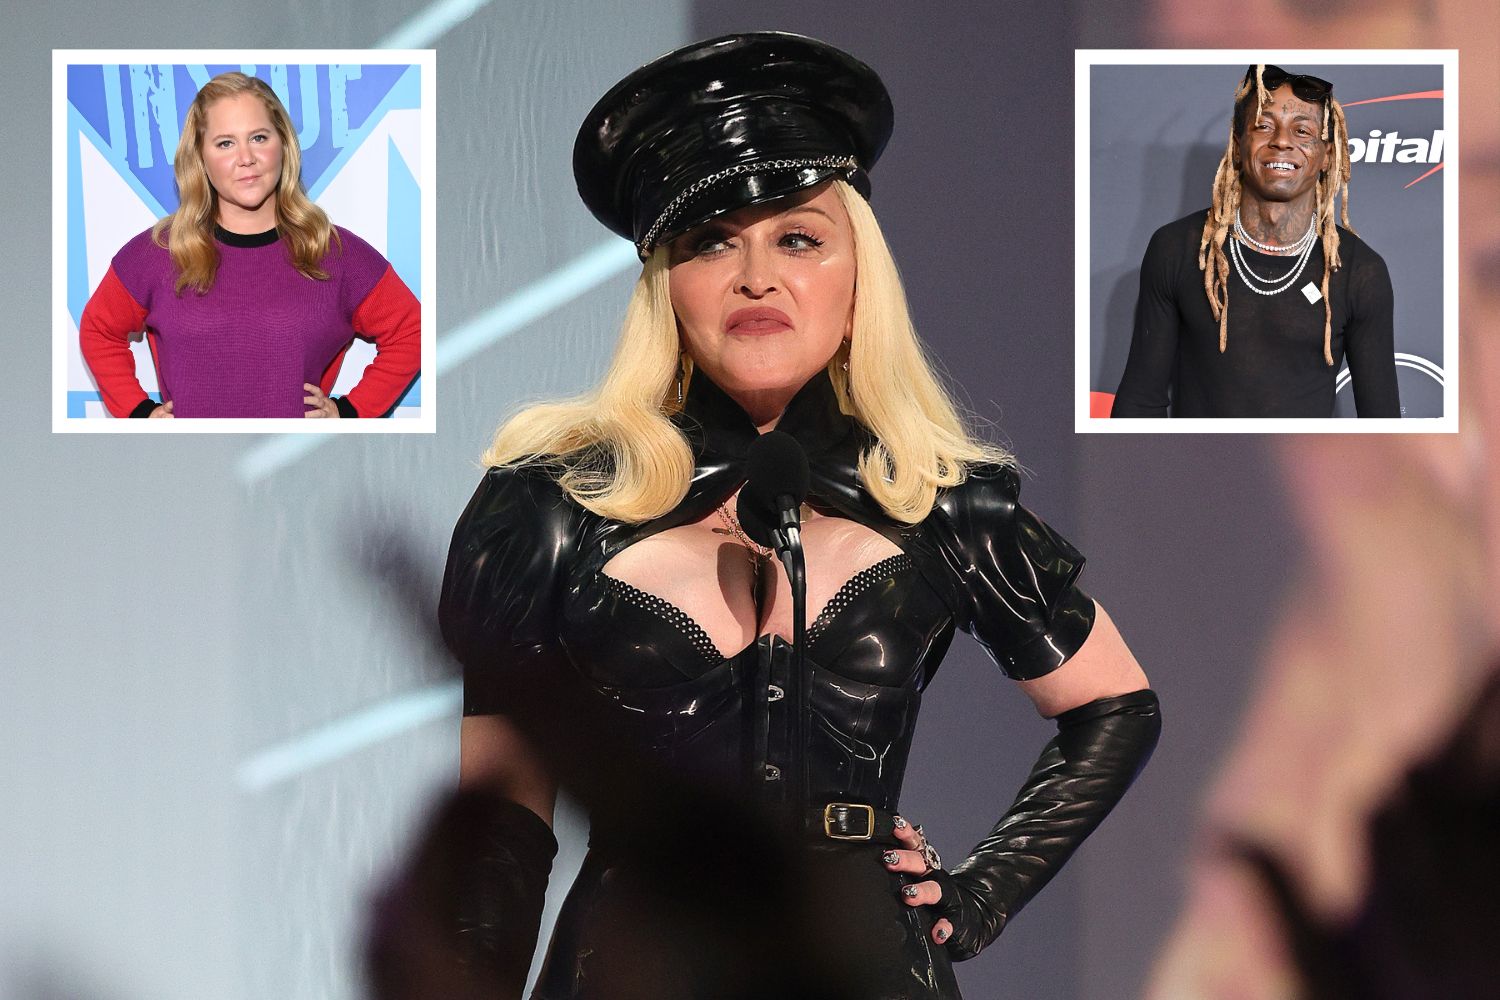 Whos in Madonnas Tour Video on Instagram? From Amy Schumer to Lil Wayne pic